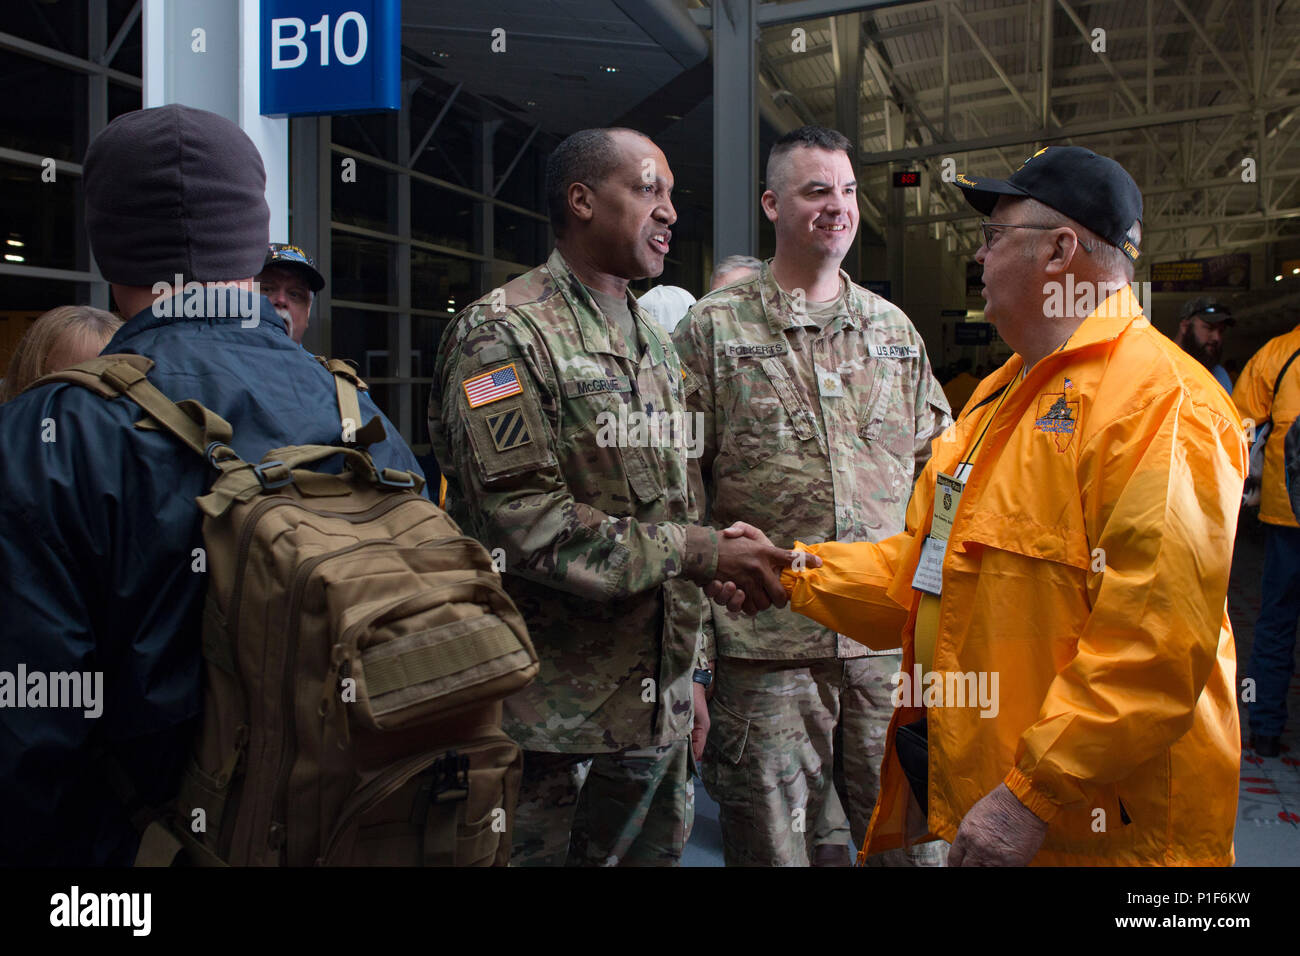 Lt. Col. Arthur McGrue, the executive officer of First Army Headquarters, shakes the hand of a veteran boarding an honor flight at the Quad City International Airport, Ill., Oct. 27, 2016. Honor Flight of the Quad Cities, a chapter of the Honor Flight Network, organizes flights for veterans of World War II and the Korean and Vietnam Wars to visit memorials dedicated to them in Washington, D.C. Volunteers, known as “guardians,” accompany the veterans to keep them company and assist as needed. Approximately 95 veterans and 65 guardians participated in this flight. (Photo by Staff Sgt. Ian M. Kum Stock Photo